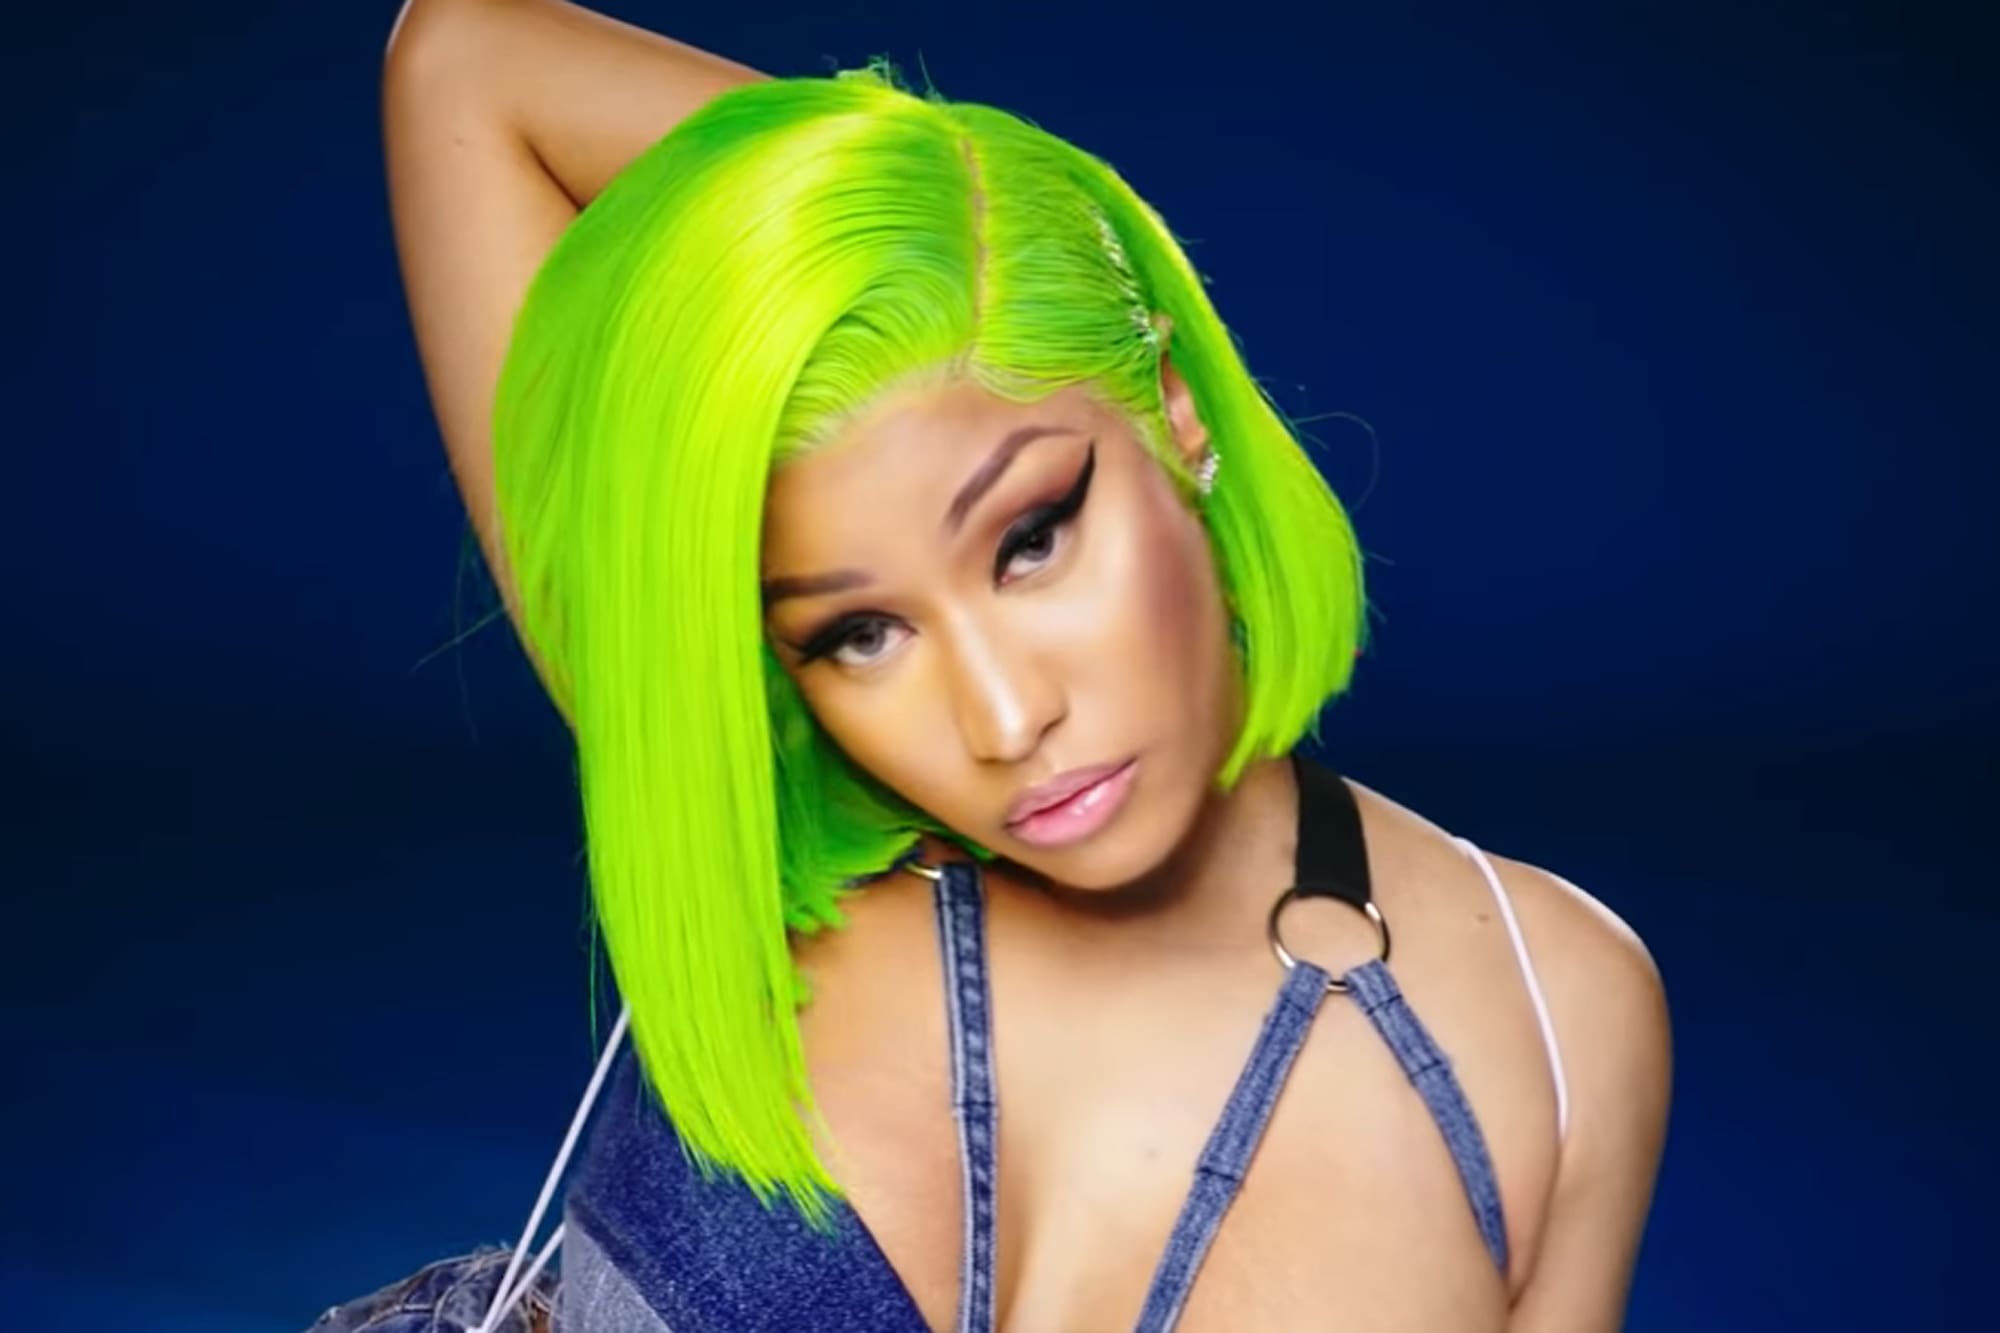 Nicki Minaj Reportedly Cuts Ties With Her Managers - The Decision Was Mutual